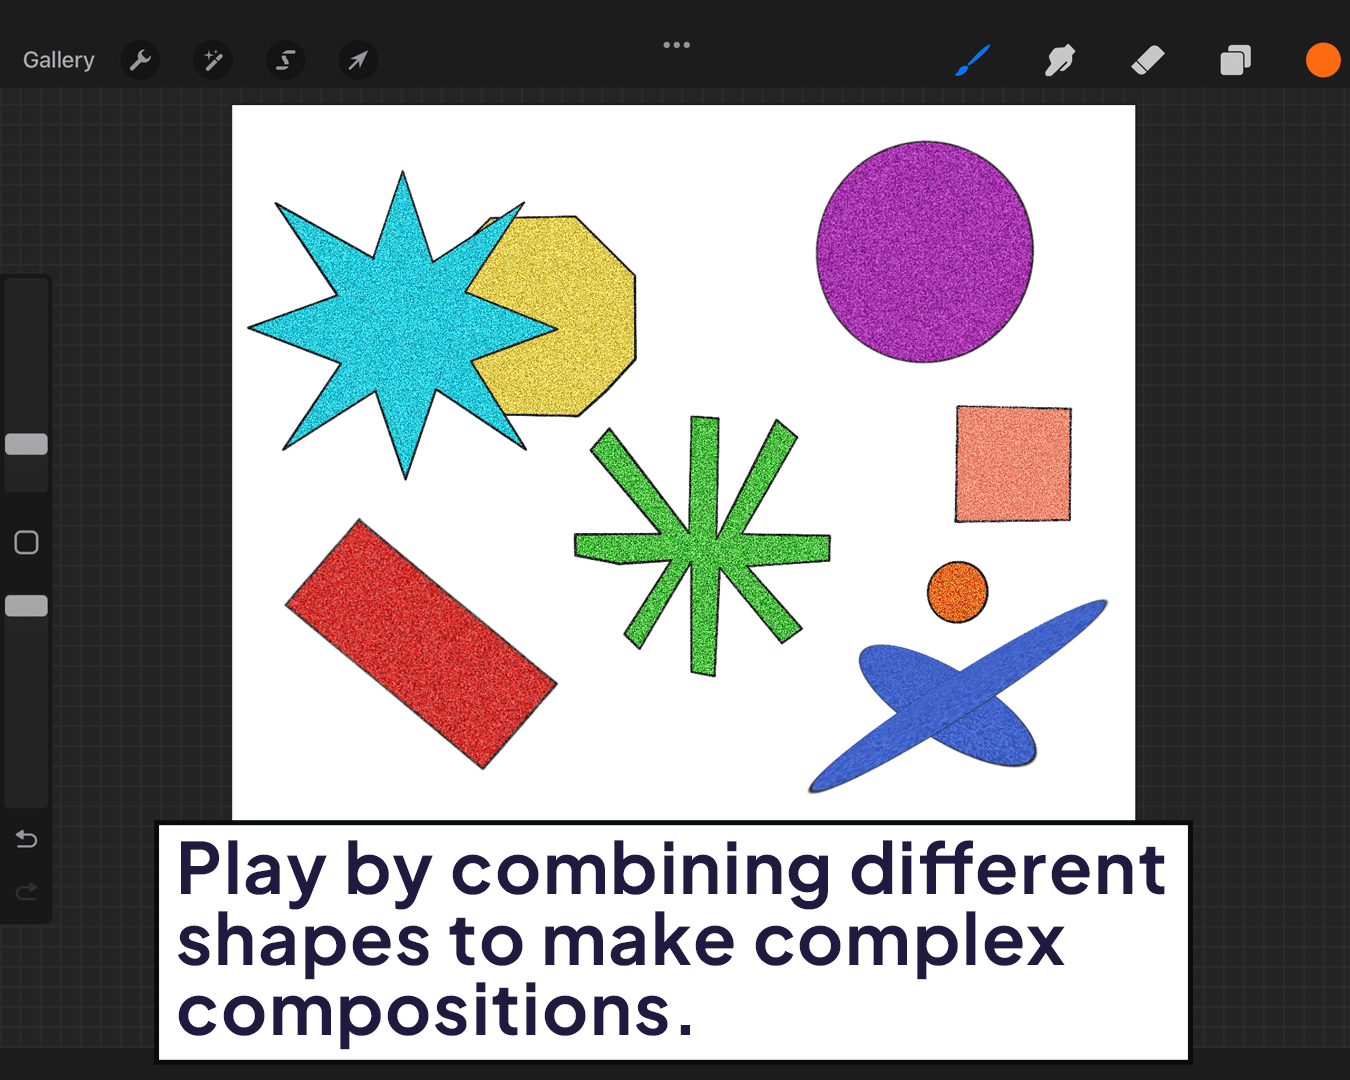 Combining different shapes